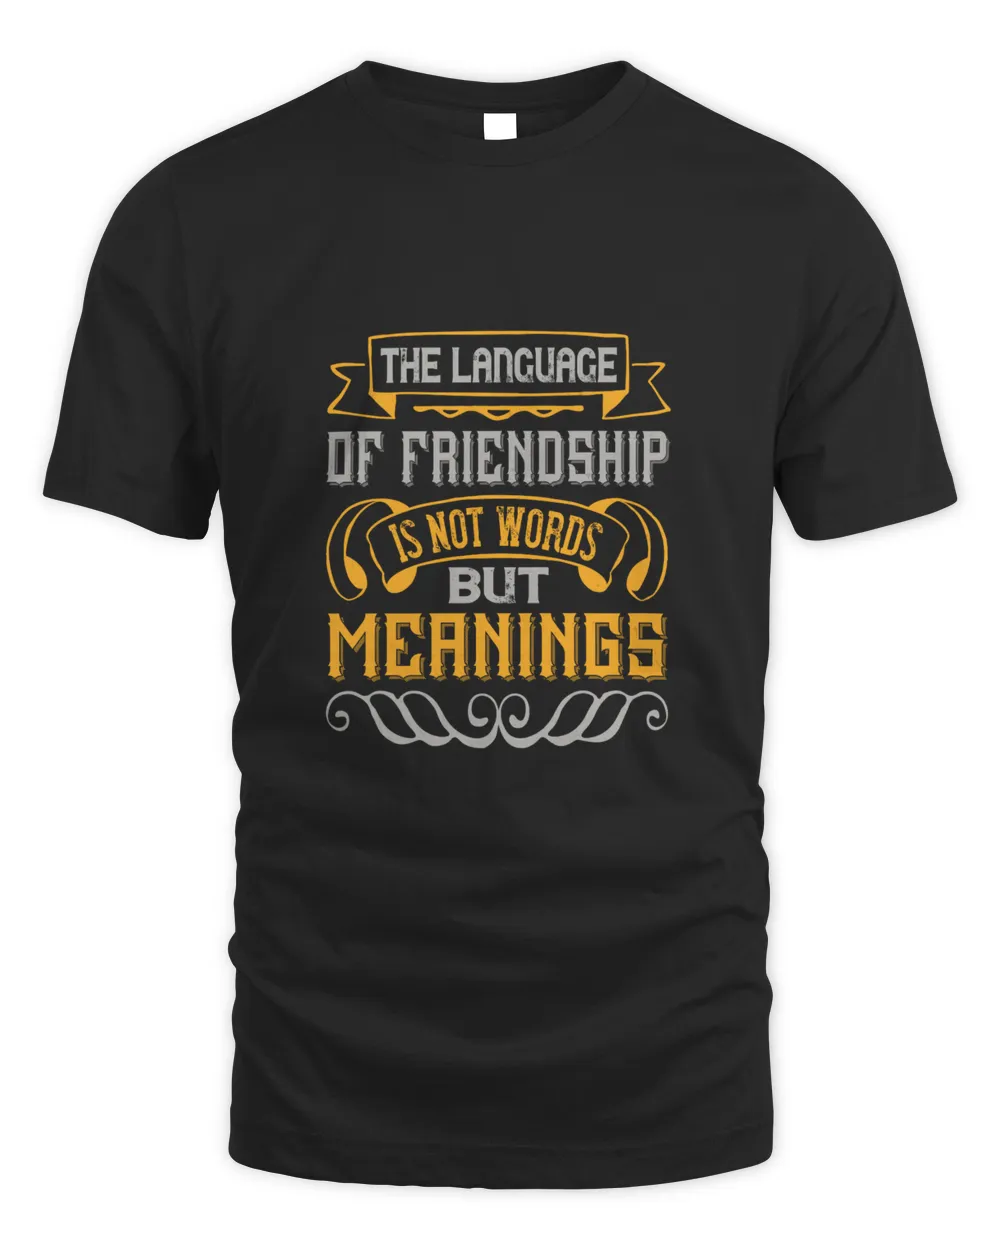 The Language Of Friendship Is Not Words But Meanings Bestie Gift, Best Friend Gift, Best Friend T Shirt, Bestie Shirt, Best Friend Shirt, Friendship Gift, Best Friend Birthday Gift, Frie